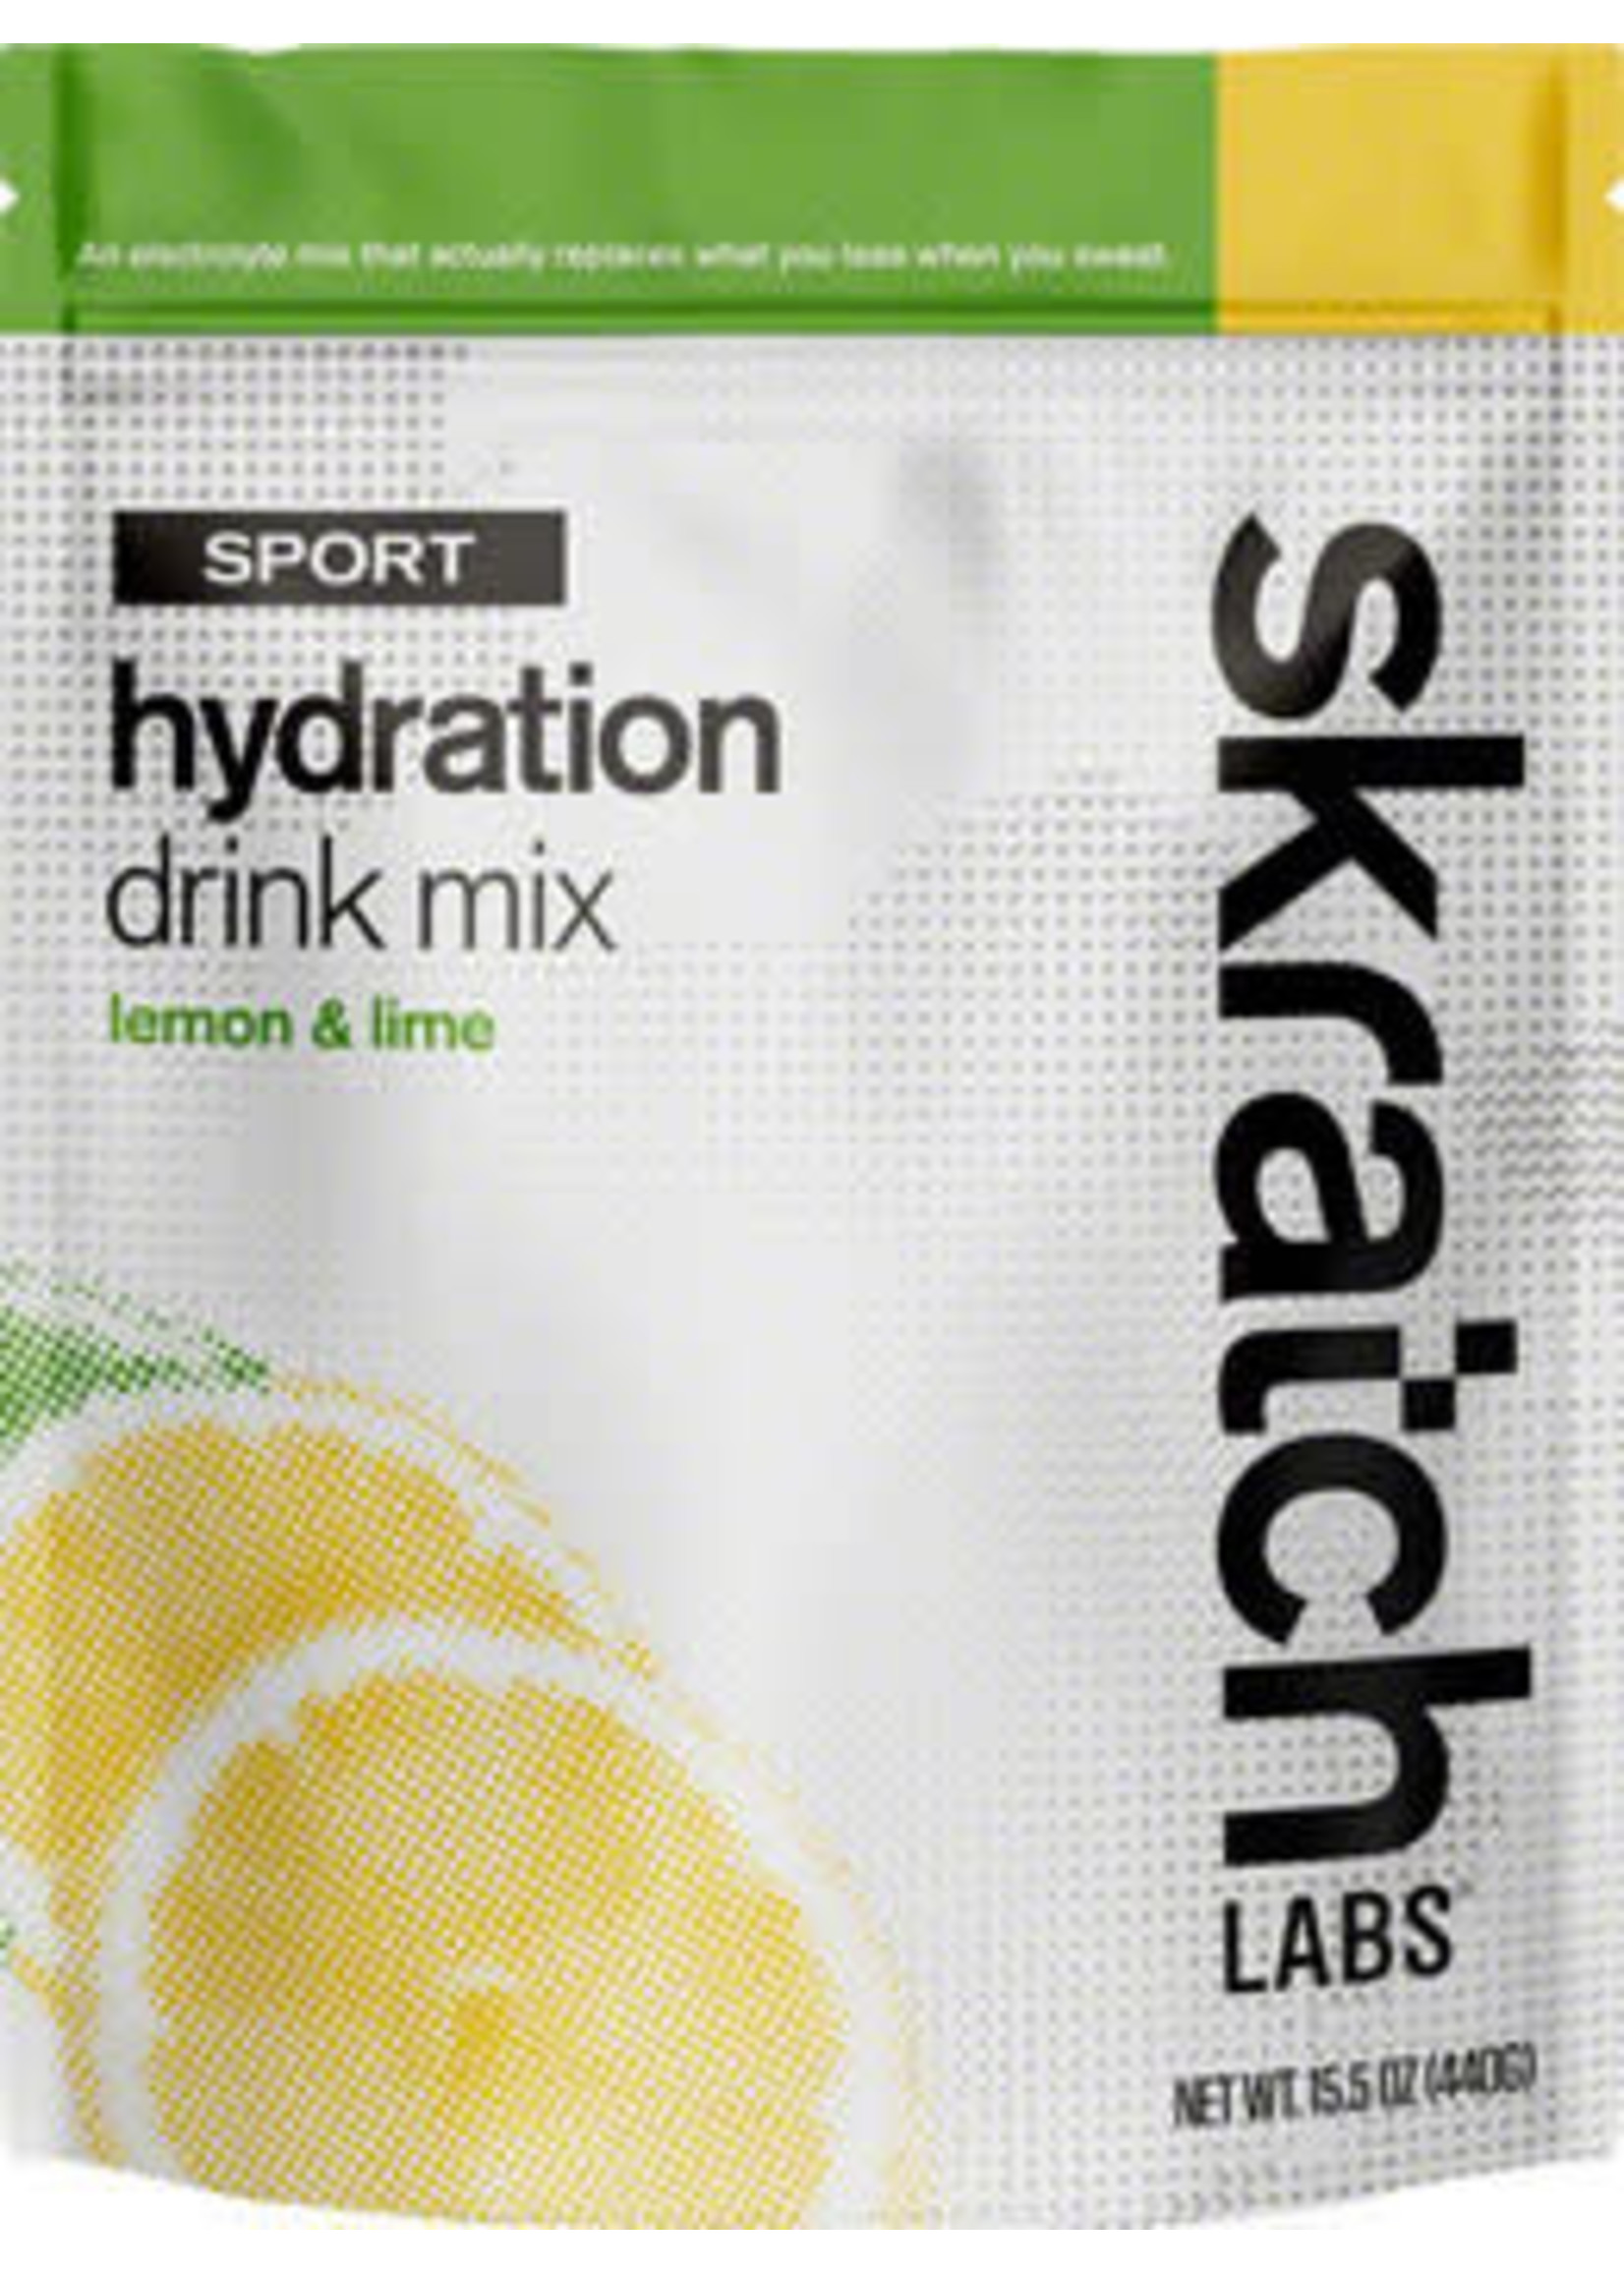 Skratch Skratch Labs Sport Hydration Drink Mix: Lemons and Limes, 60-Serving Resealable Pouch